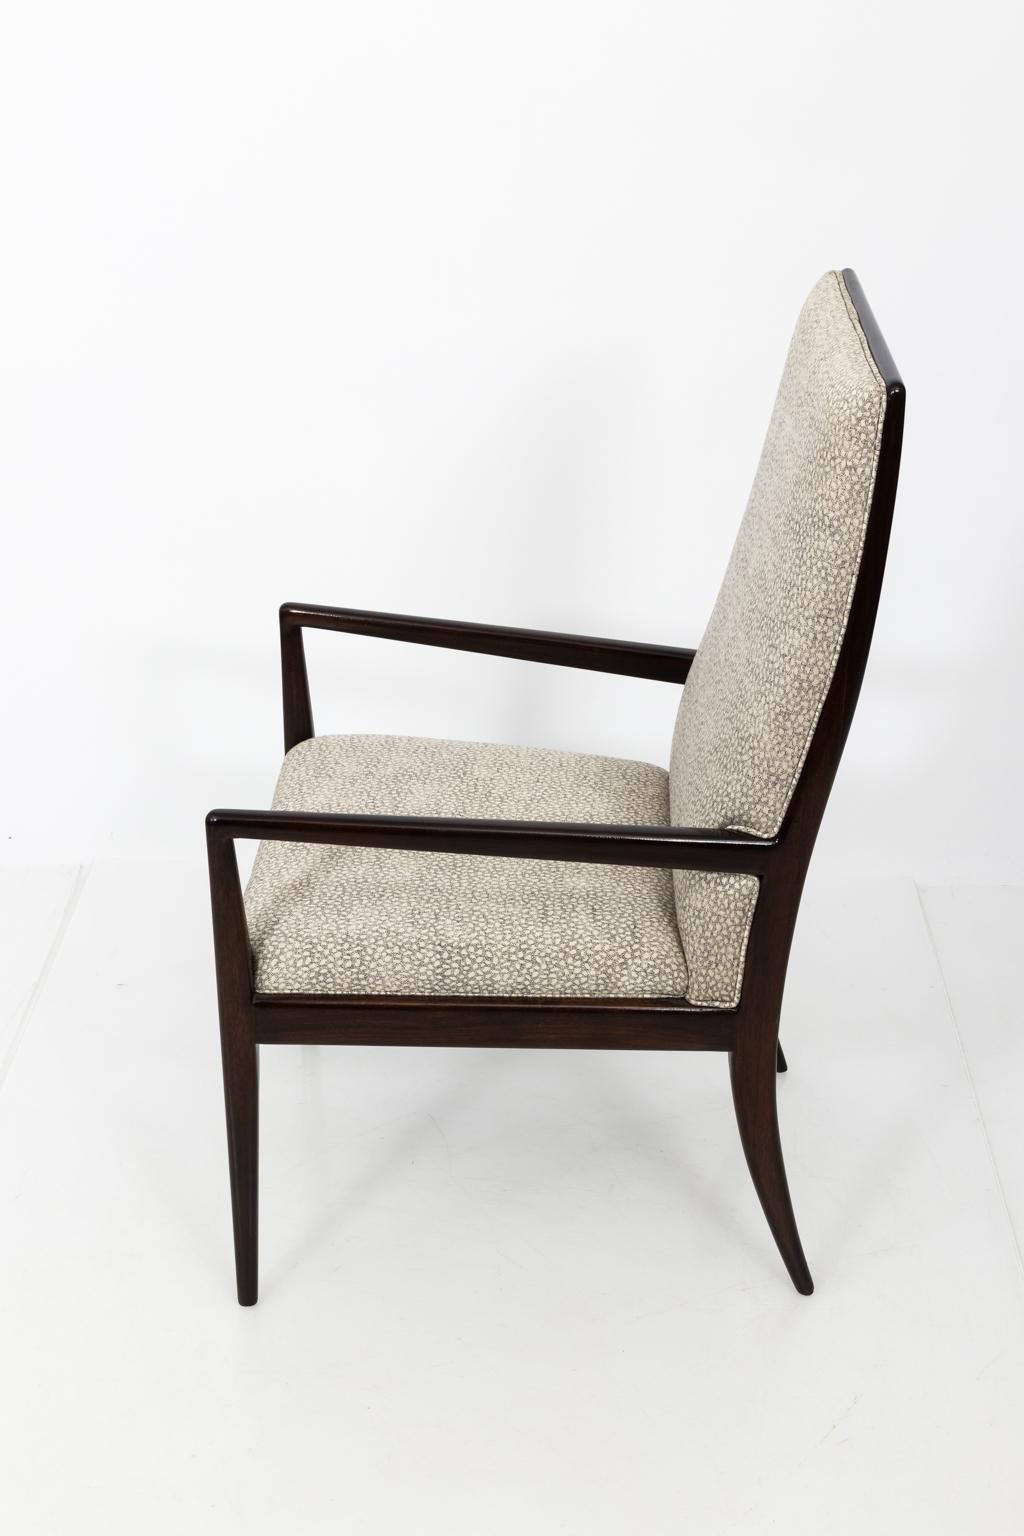 Pair of sculptural high back armchairs in the manner of T.H. Robsjohn-Gibbins, circa 1950s-1960s. Newly refinished in a deep espresso wood with cream and black upholstery.